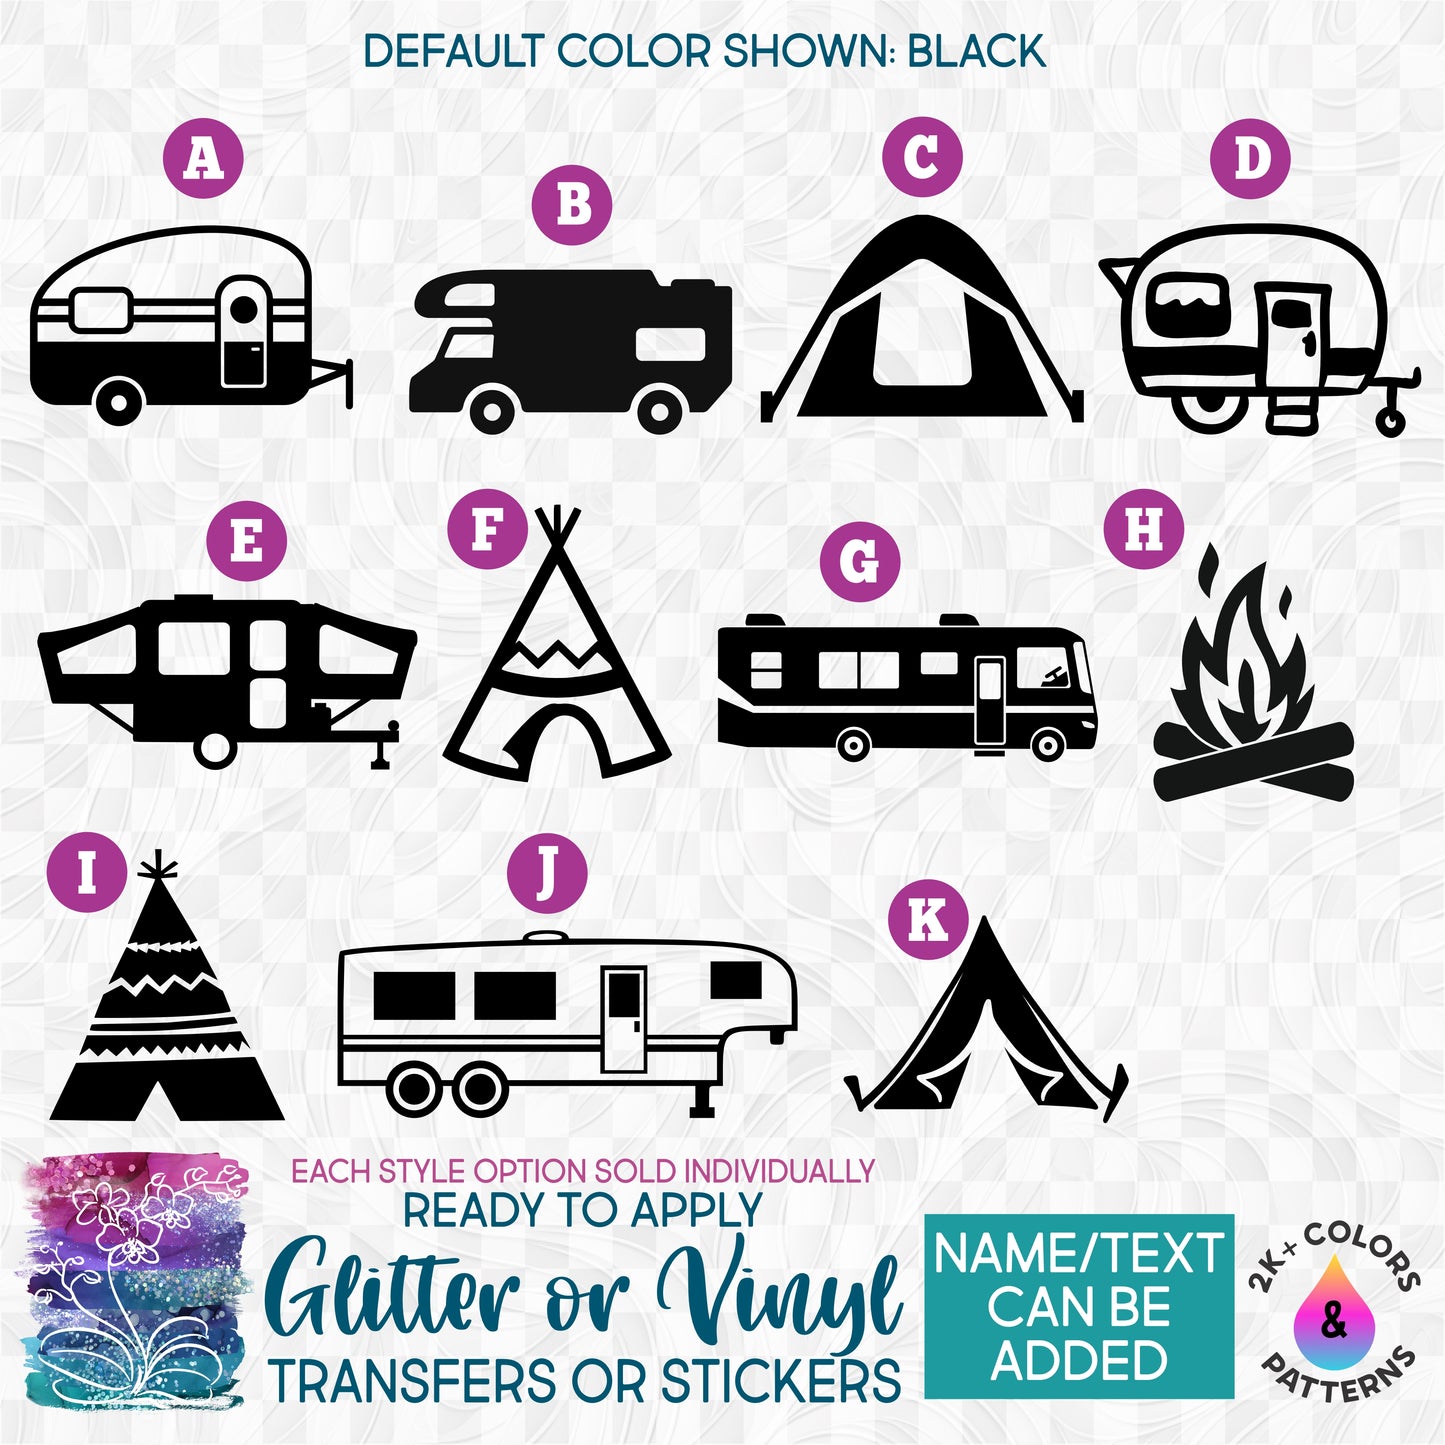 (s228-1) Campers Camper RV Tent Trailer Teepee Campfire Motorhome 5th Wheel Glitter or Vinyl Iron-On Transfer or Sticker